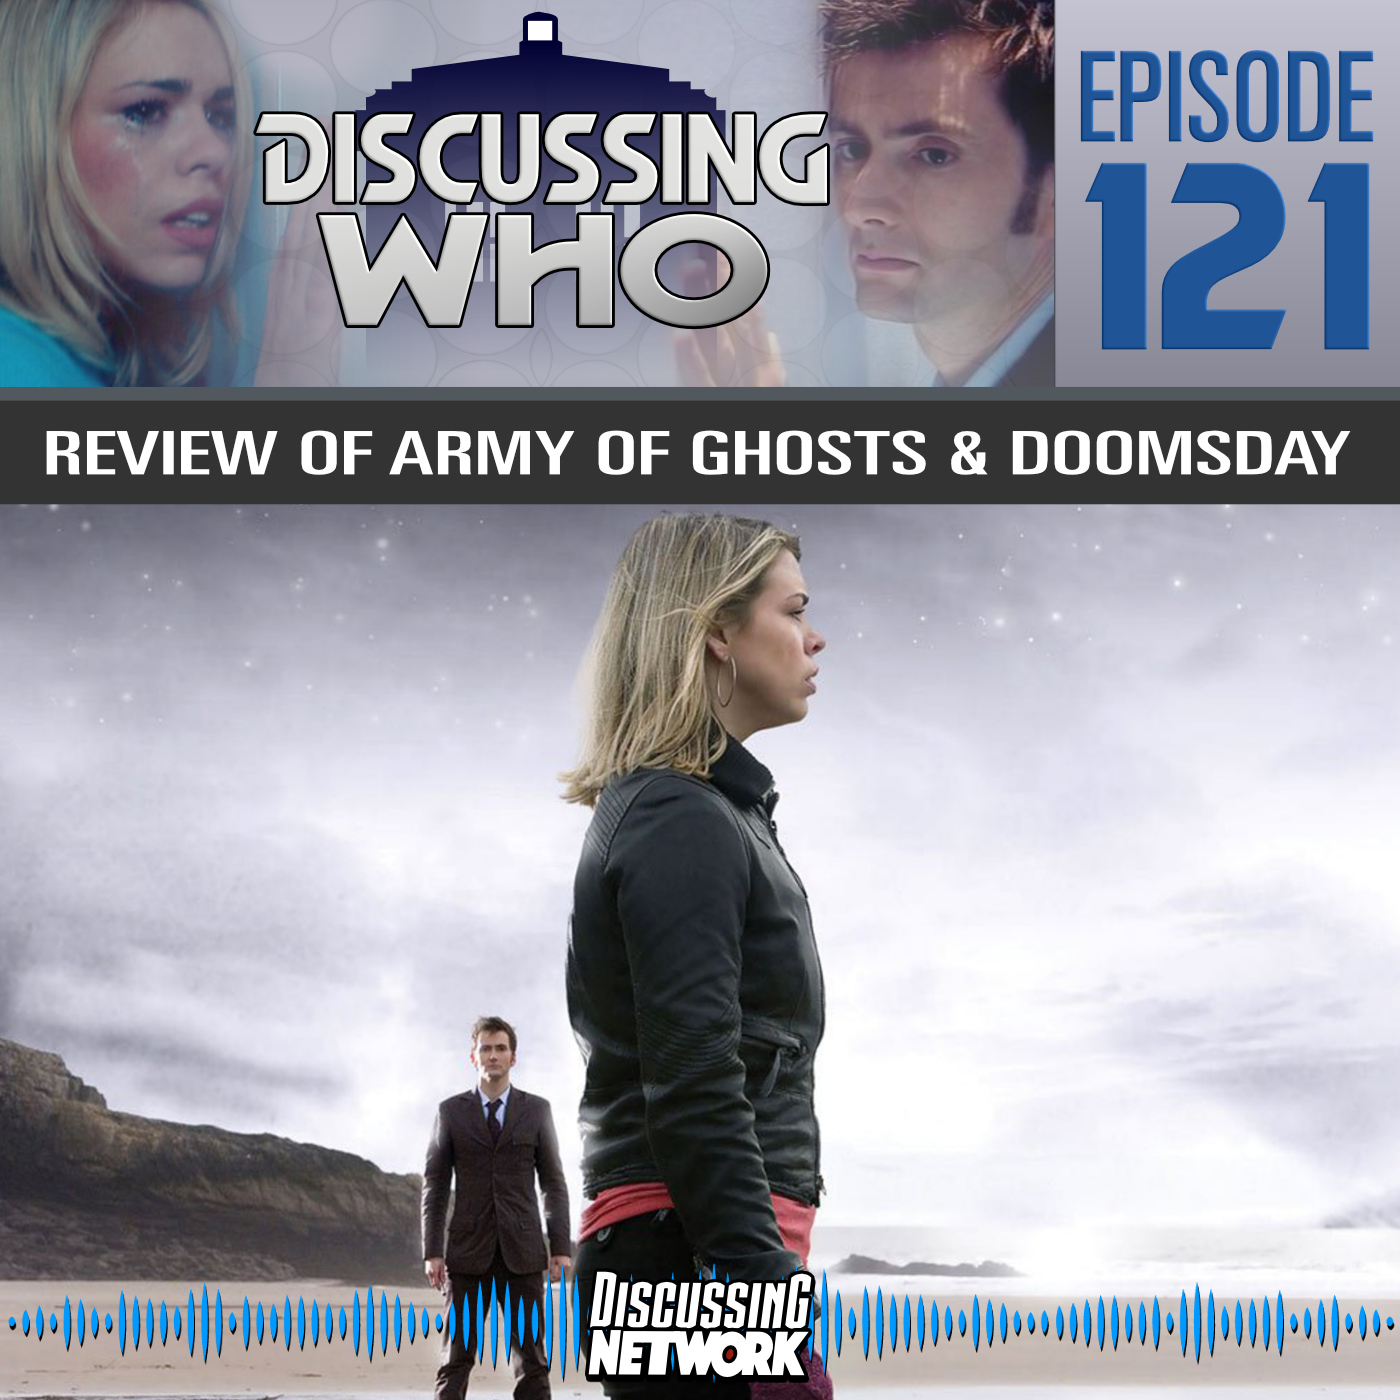 Review of Army of Ghosts and Doomsday